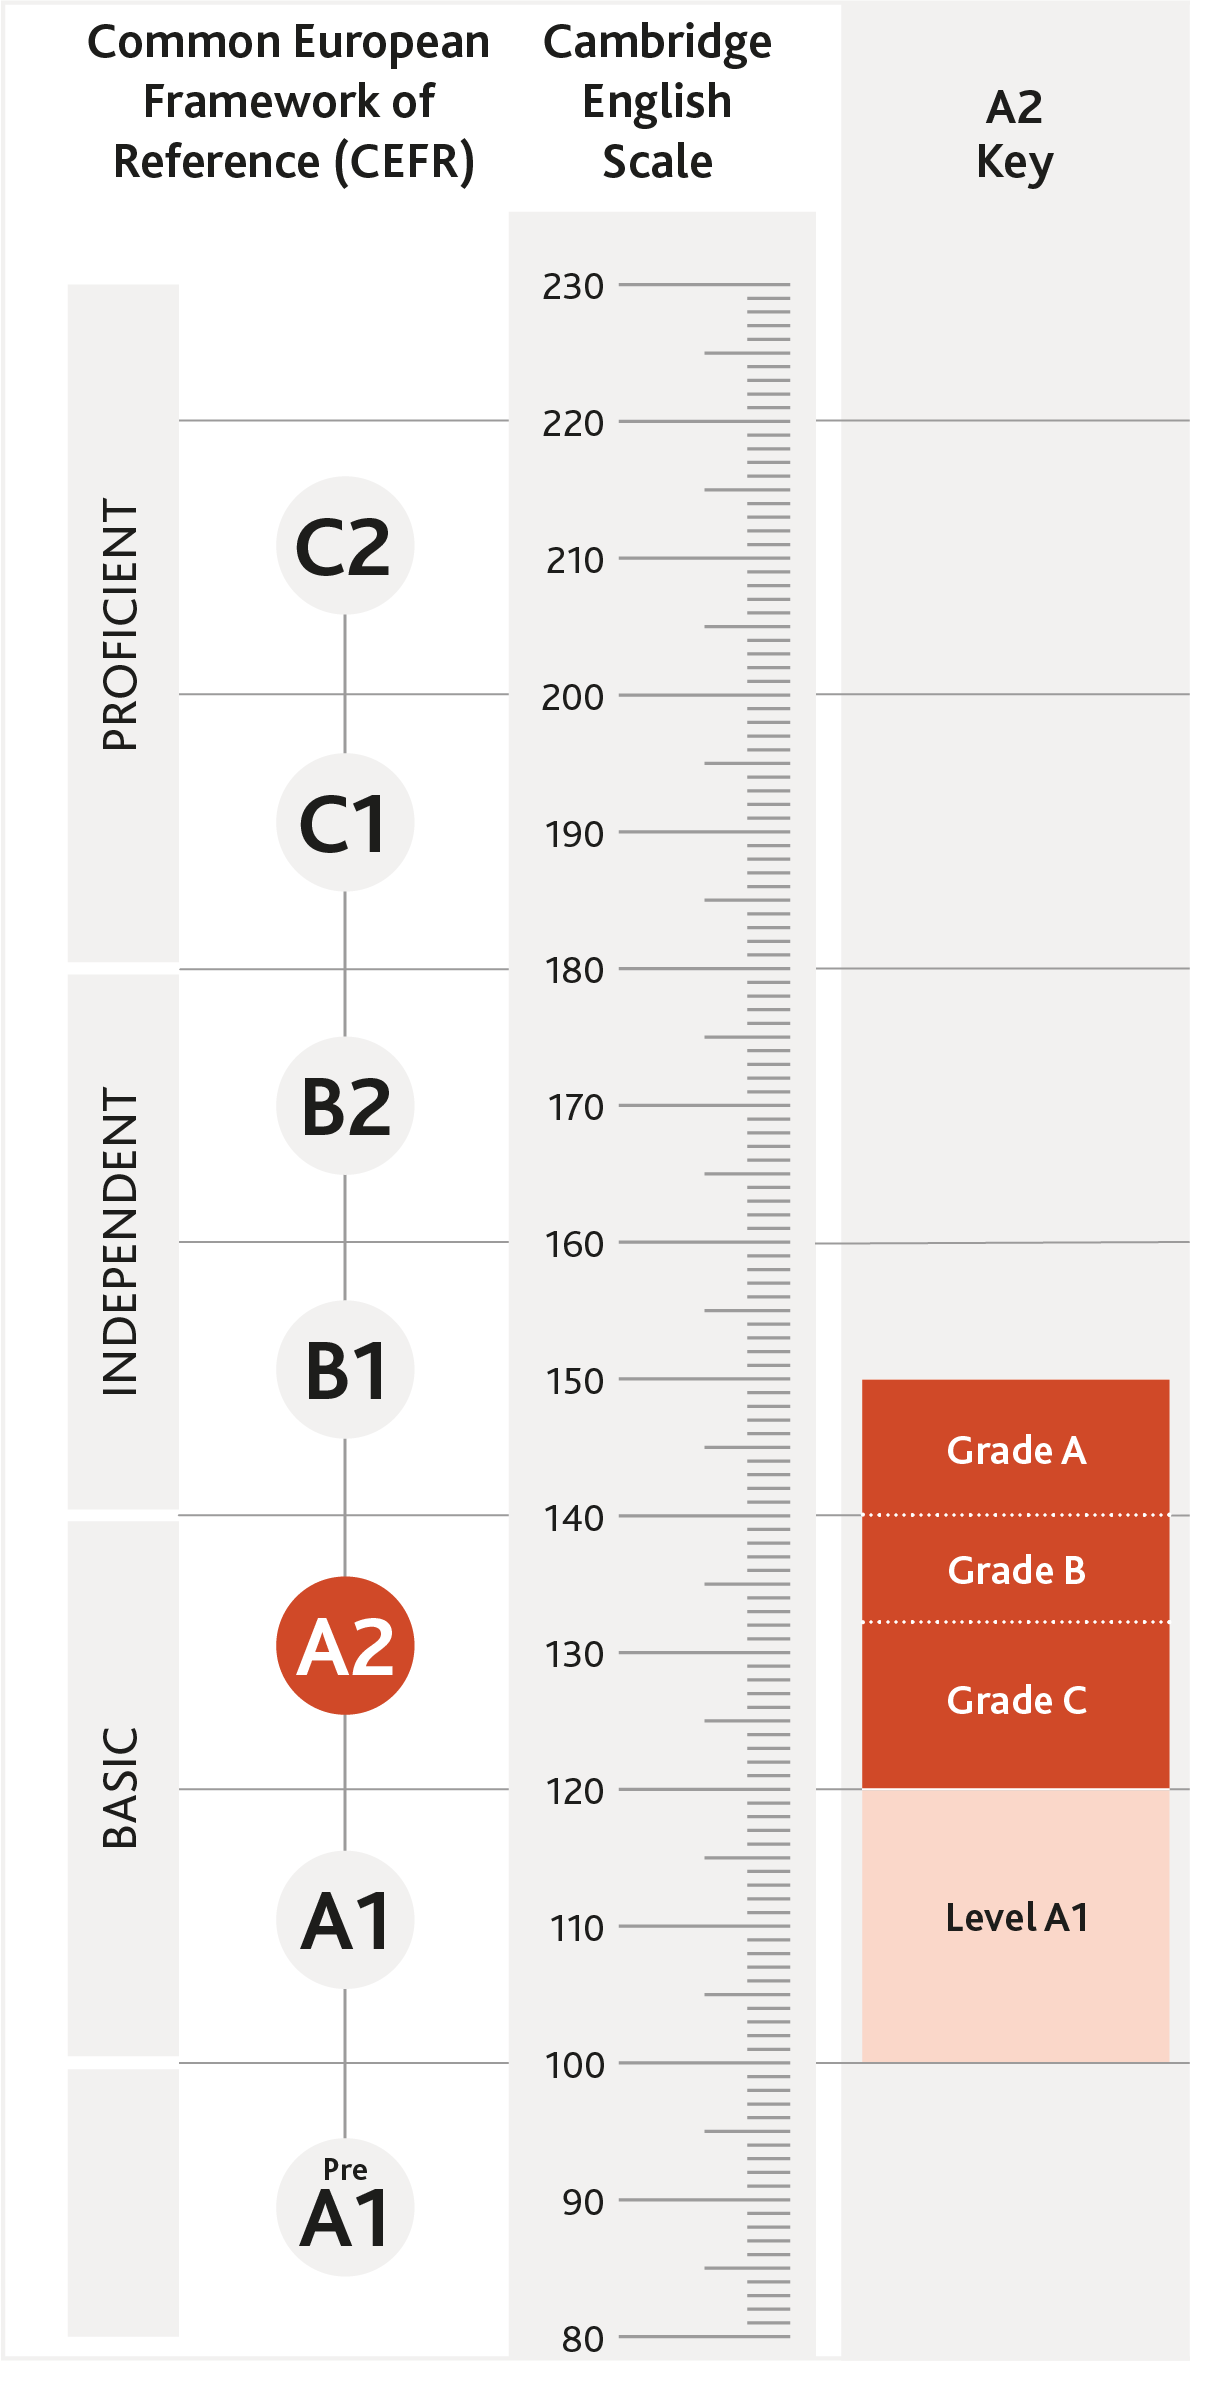 Diagram of where A2 Key is aligned on the CEFR and the Cambridge English Scale